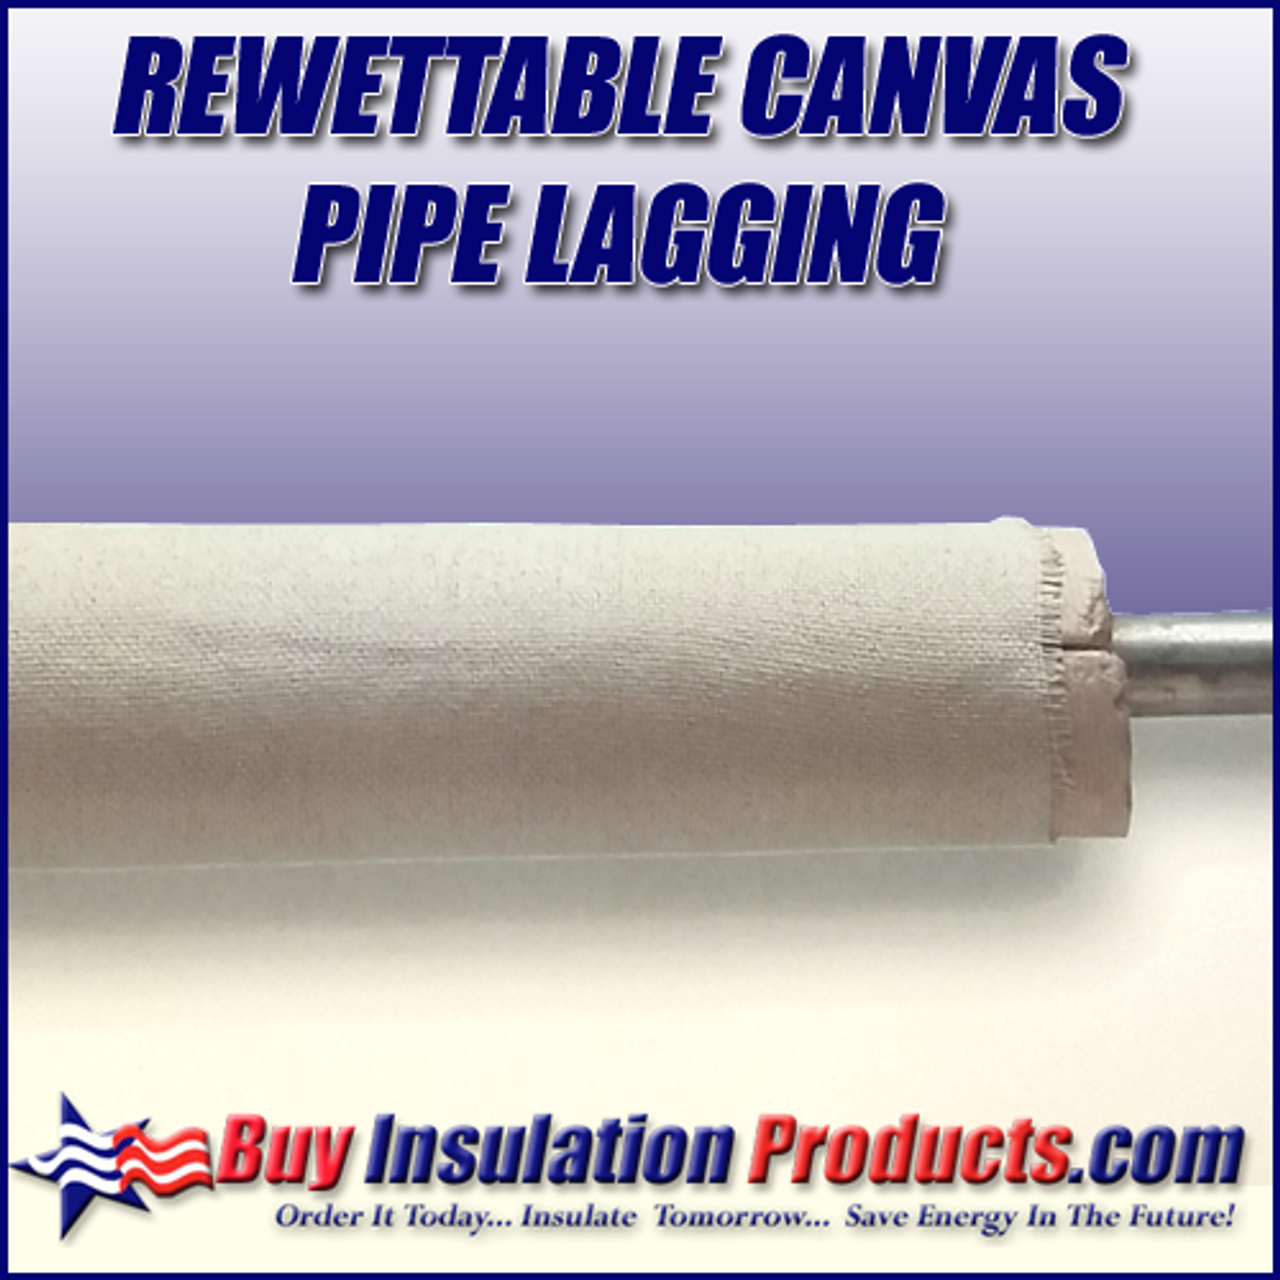 Techniques for Insulating Pipes  DIY Pipe Insulation - Knowledge Hub